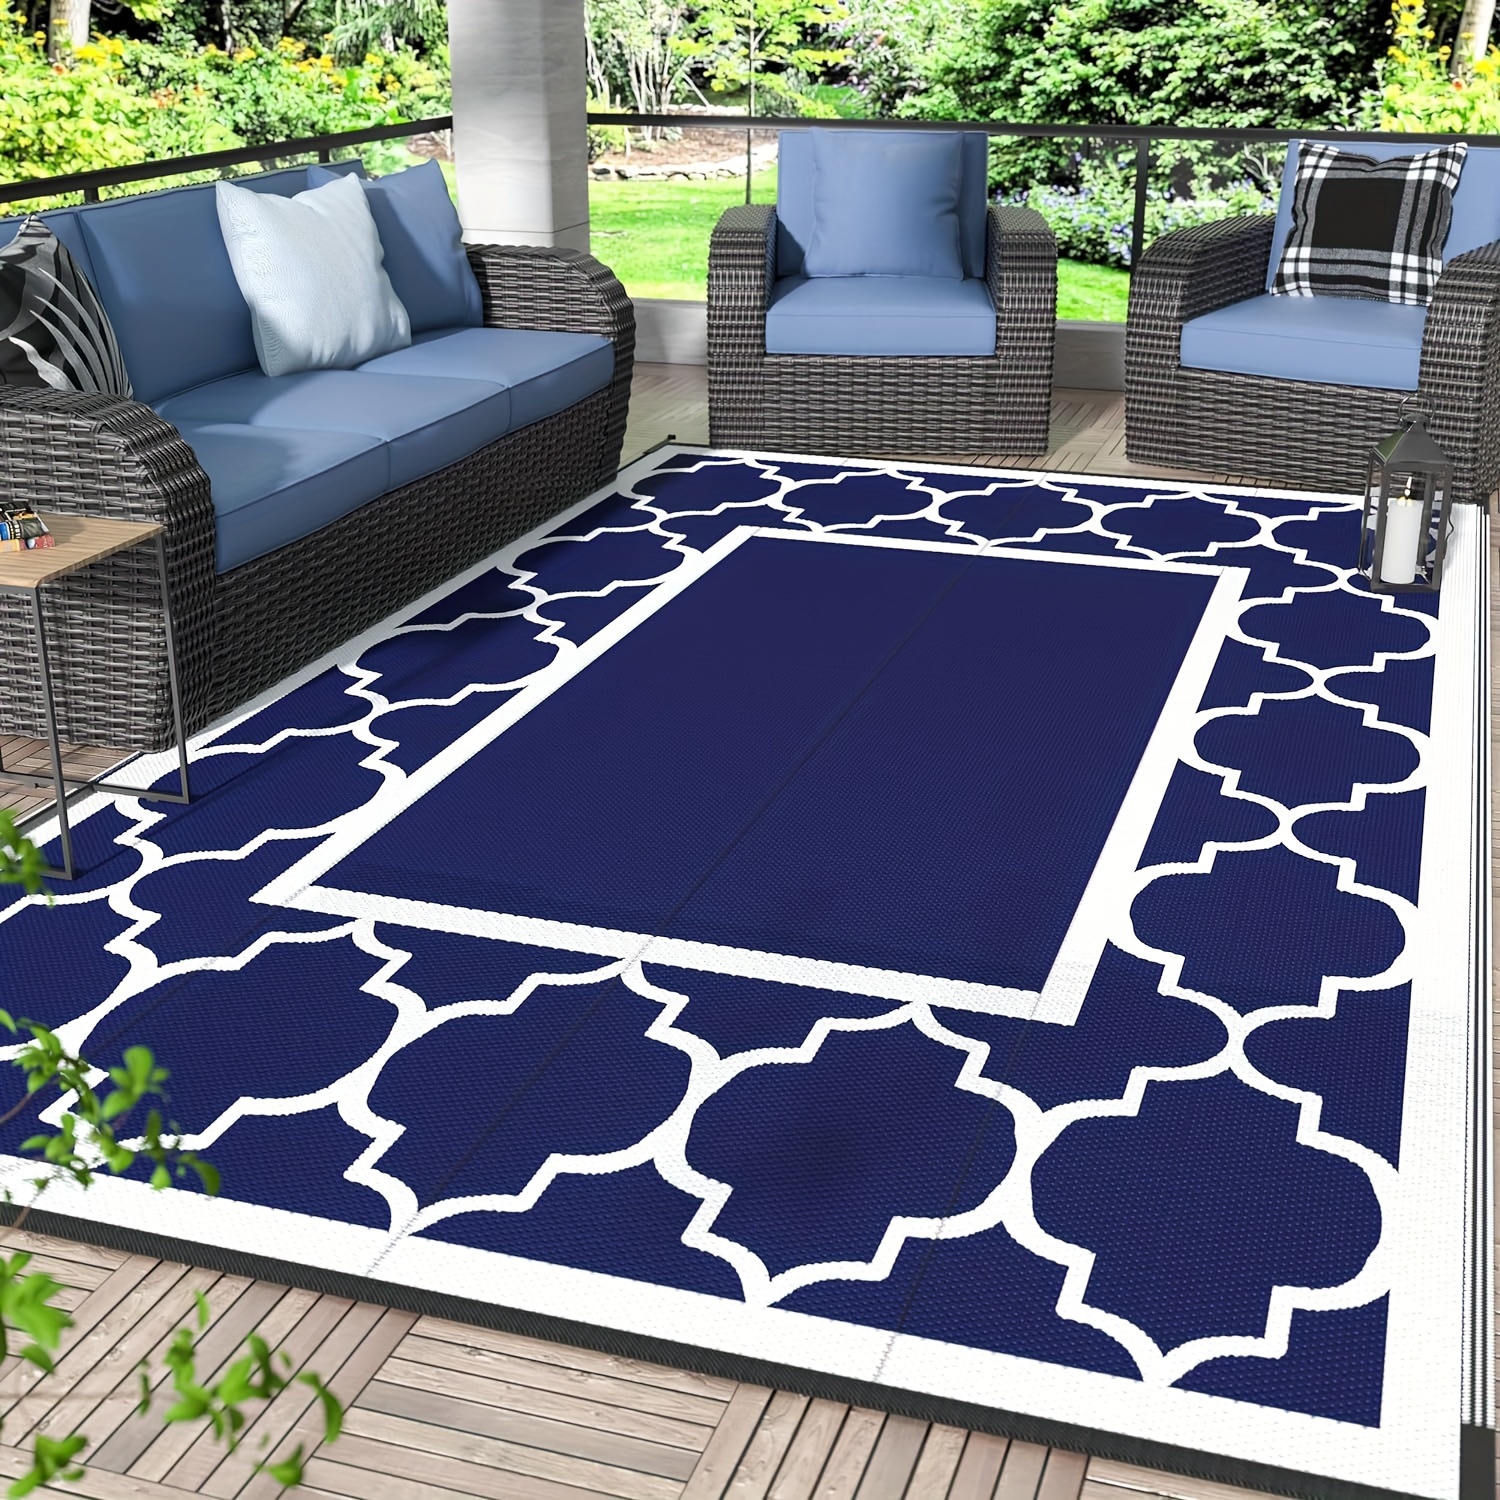 

Outdoor Rug For Patio Clearance, Waterproof Large Mat, Reversible Plastic Camping Rugs, Porch, Deck, Camper, Balcony, Backyard, Black & White